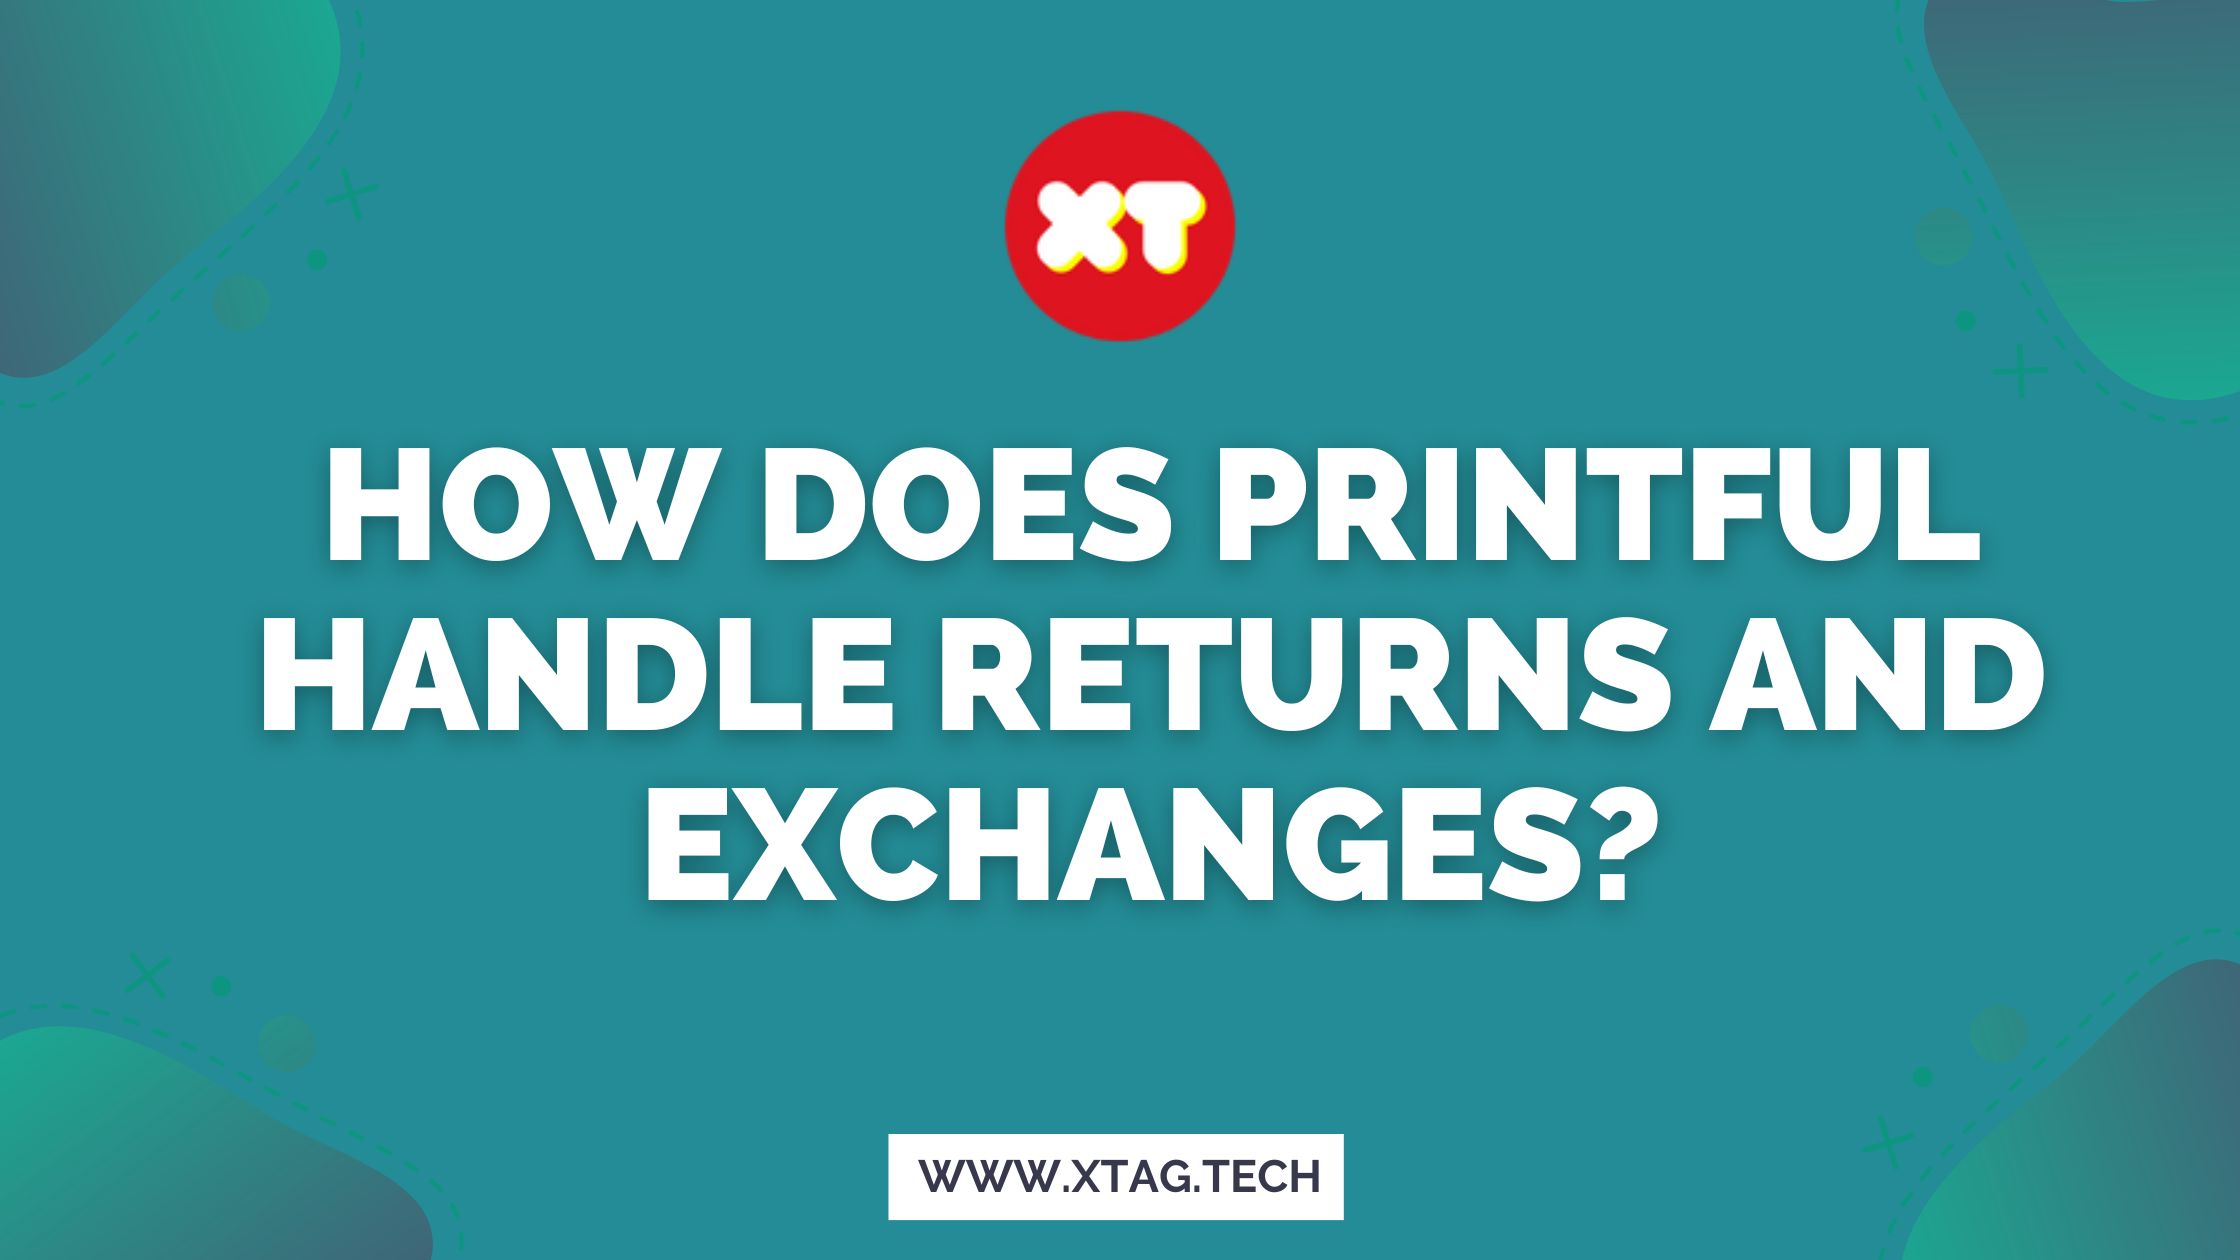 How Does Printful Handle Returns And Exchanges?